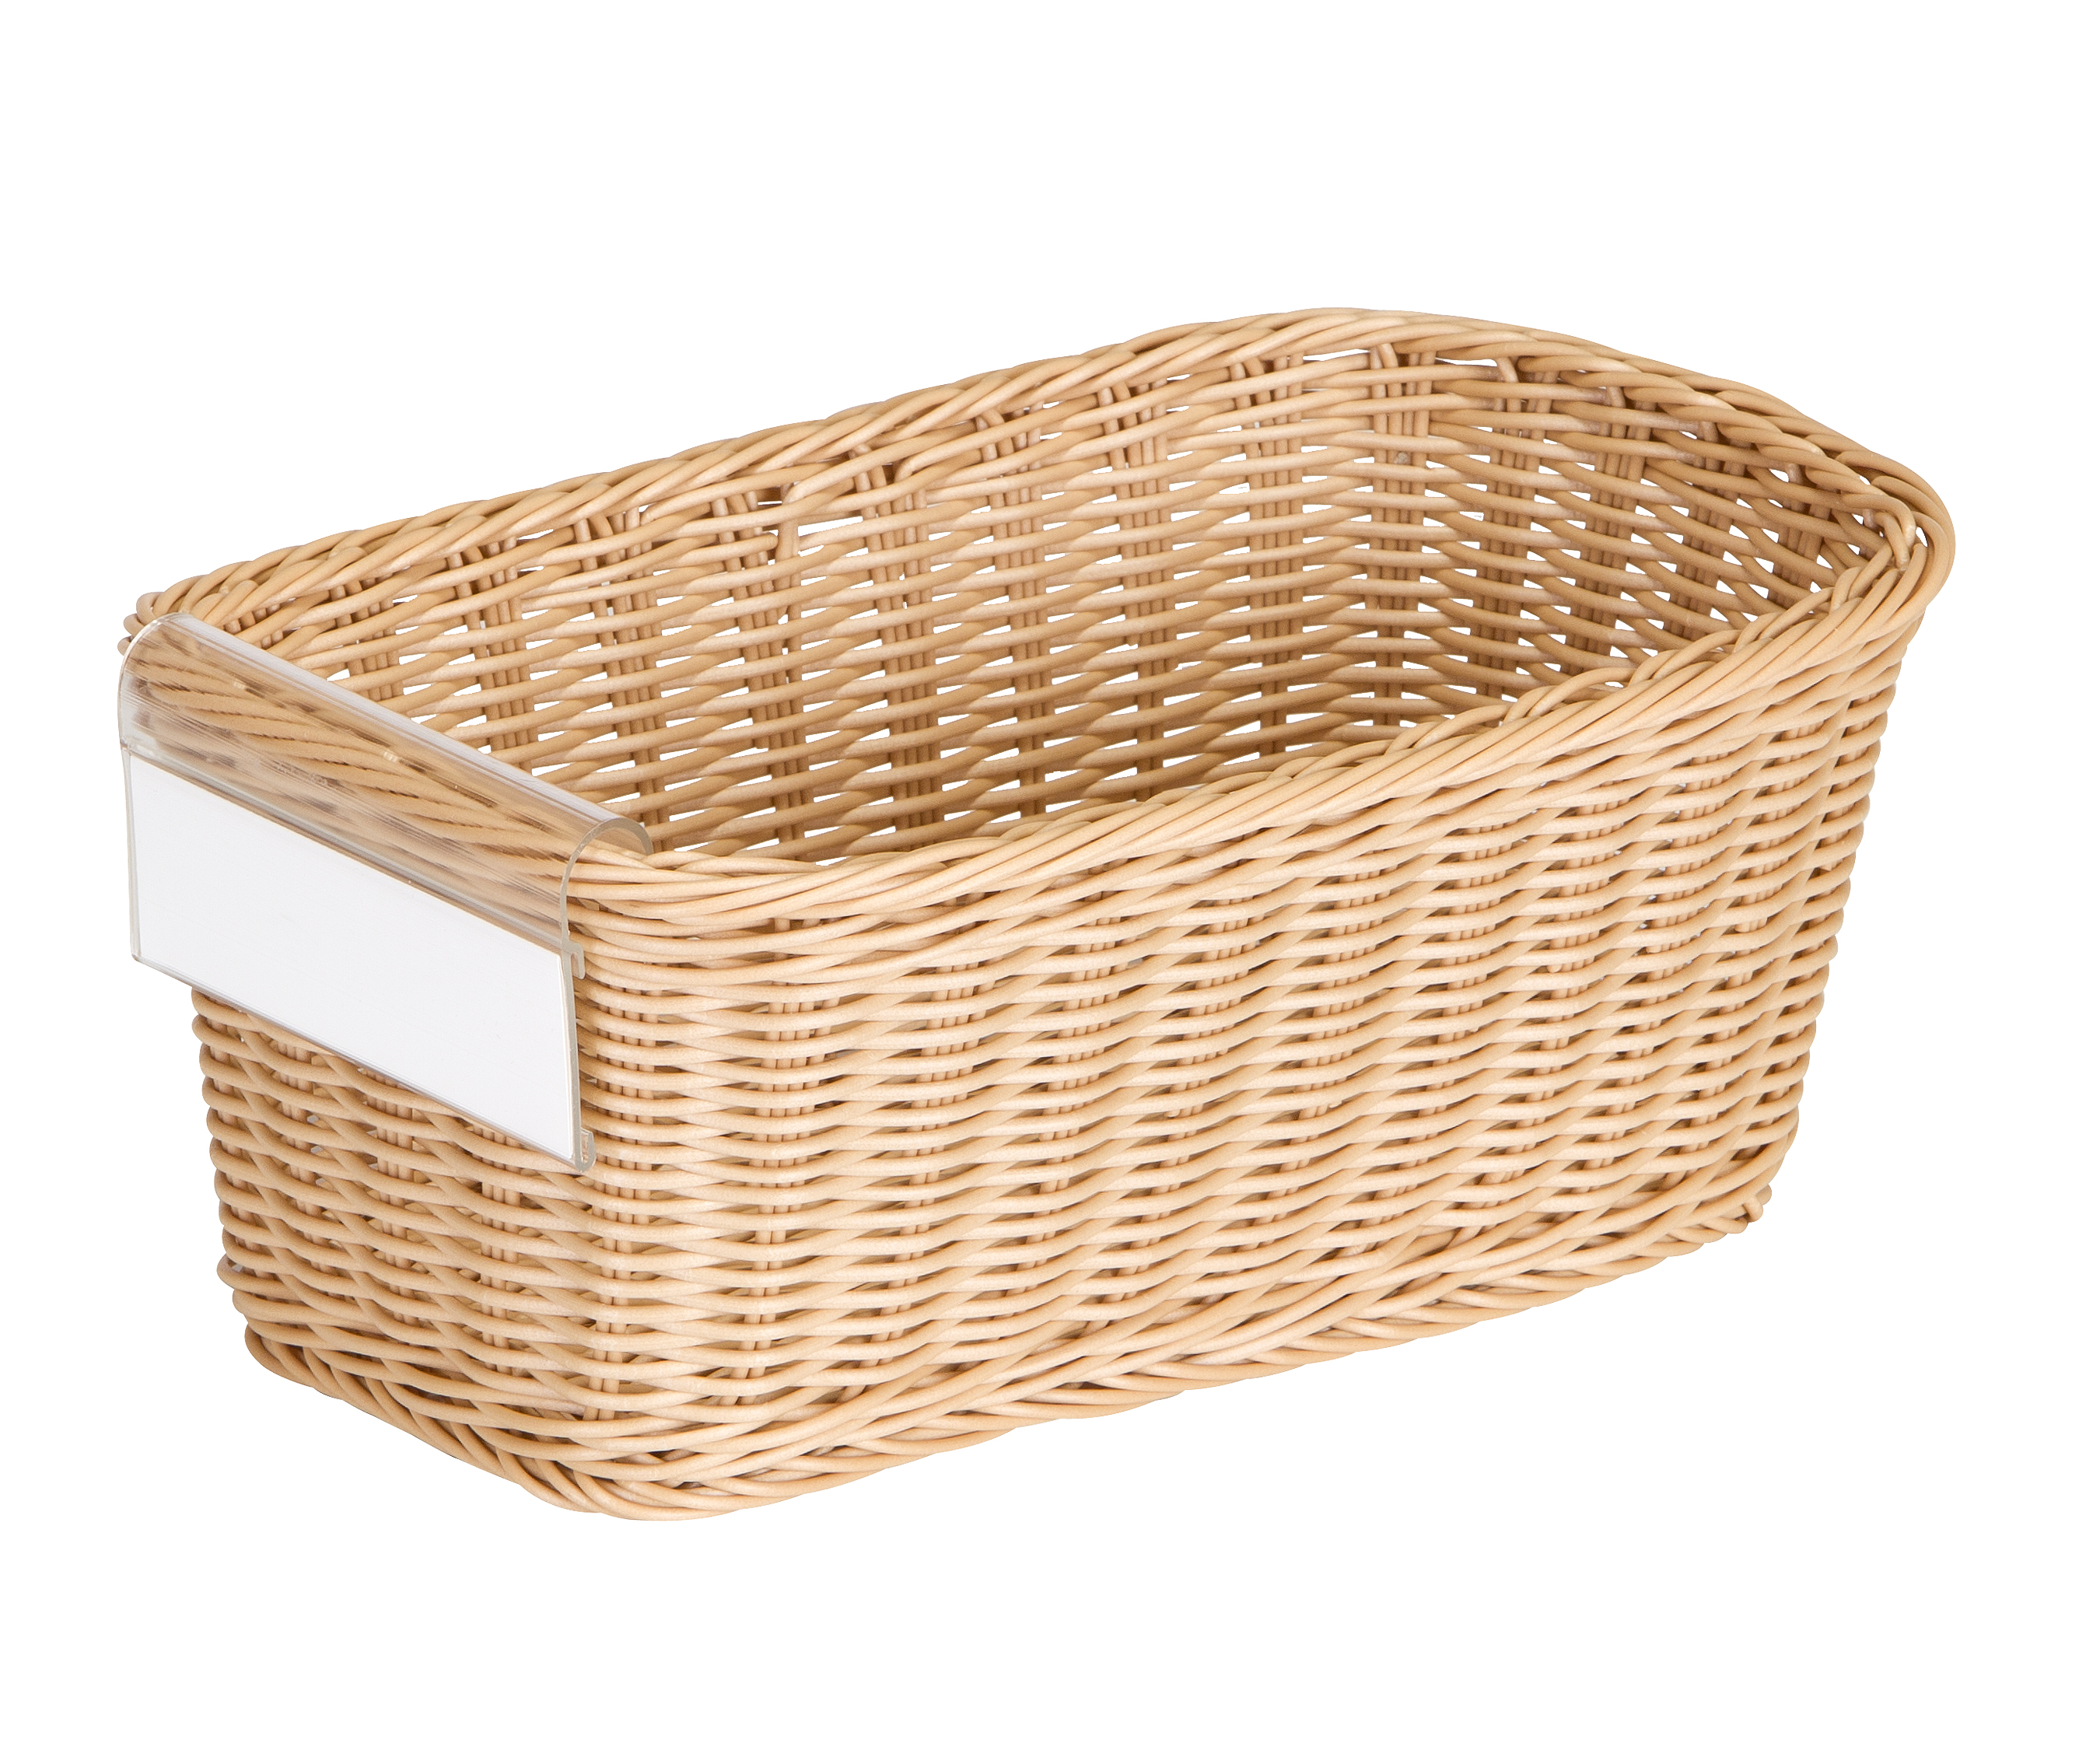 https://www.communityplaythings.com/-/media/images/product-images/classroom/shelving/product-images/g491-compact-basket/g491-primary.ashx?rev=673ae2236dda4a699014c0b434933f36&hash=01D259B974620F57F77E04669BE2D43A